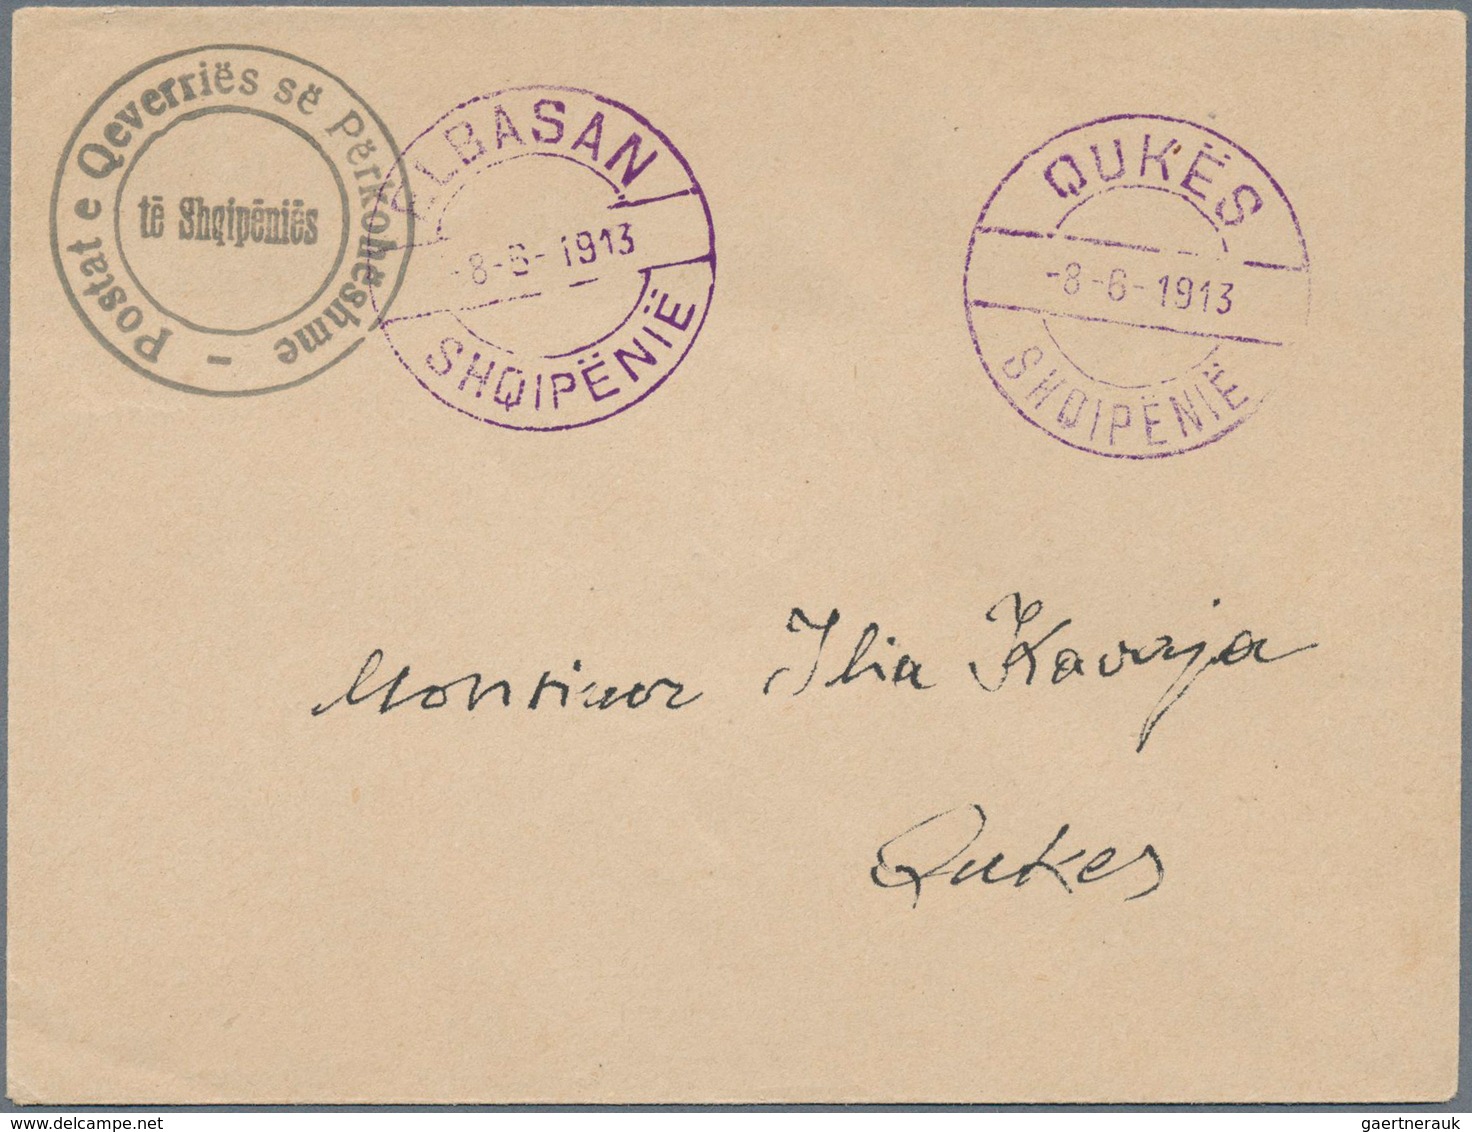 Albanien - Ganzsachen: 1913. ELBASAN Local Issue: Cover (144x109 Mm) With Official Seal, But Without - Albanië